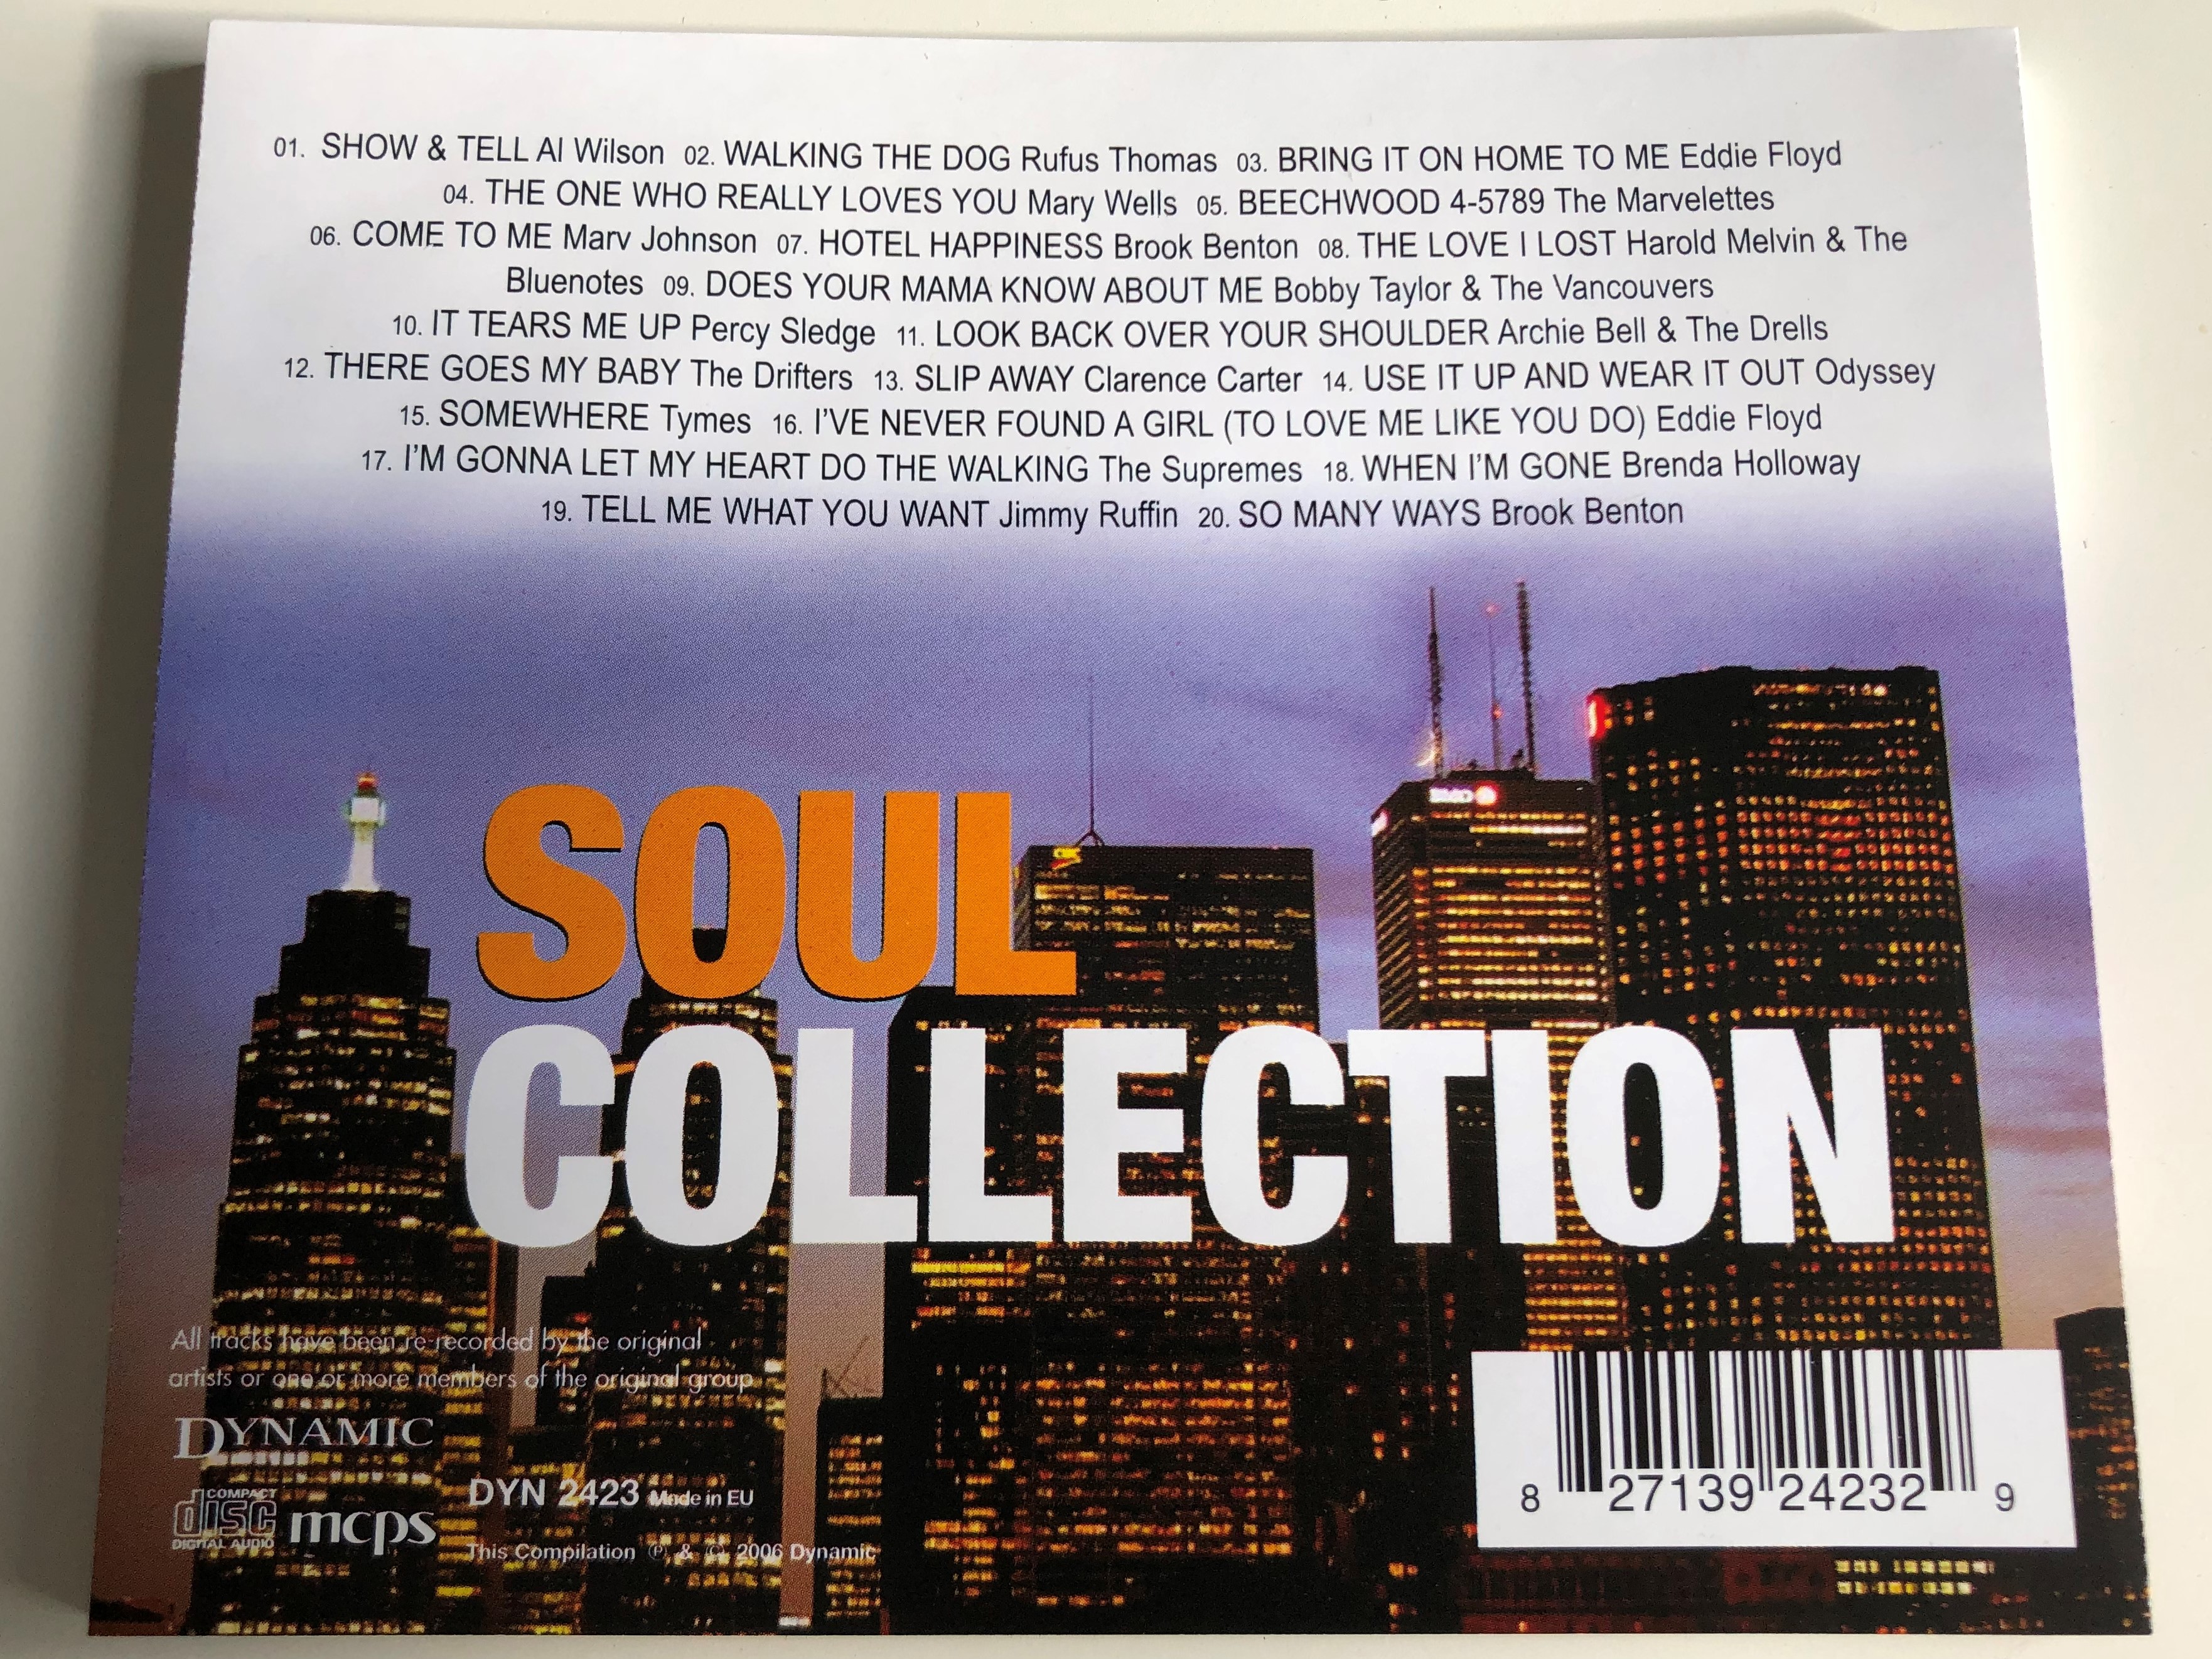 soul-collection-featuring-al-wilson-rufus-thomas-eddie-floyd-odyssey-the-supremes-and-many-more-audio-cd-2006-dynamic-dyn423-3-.jpg